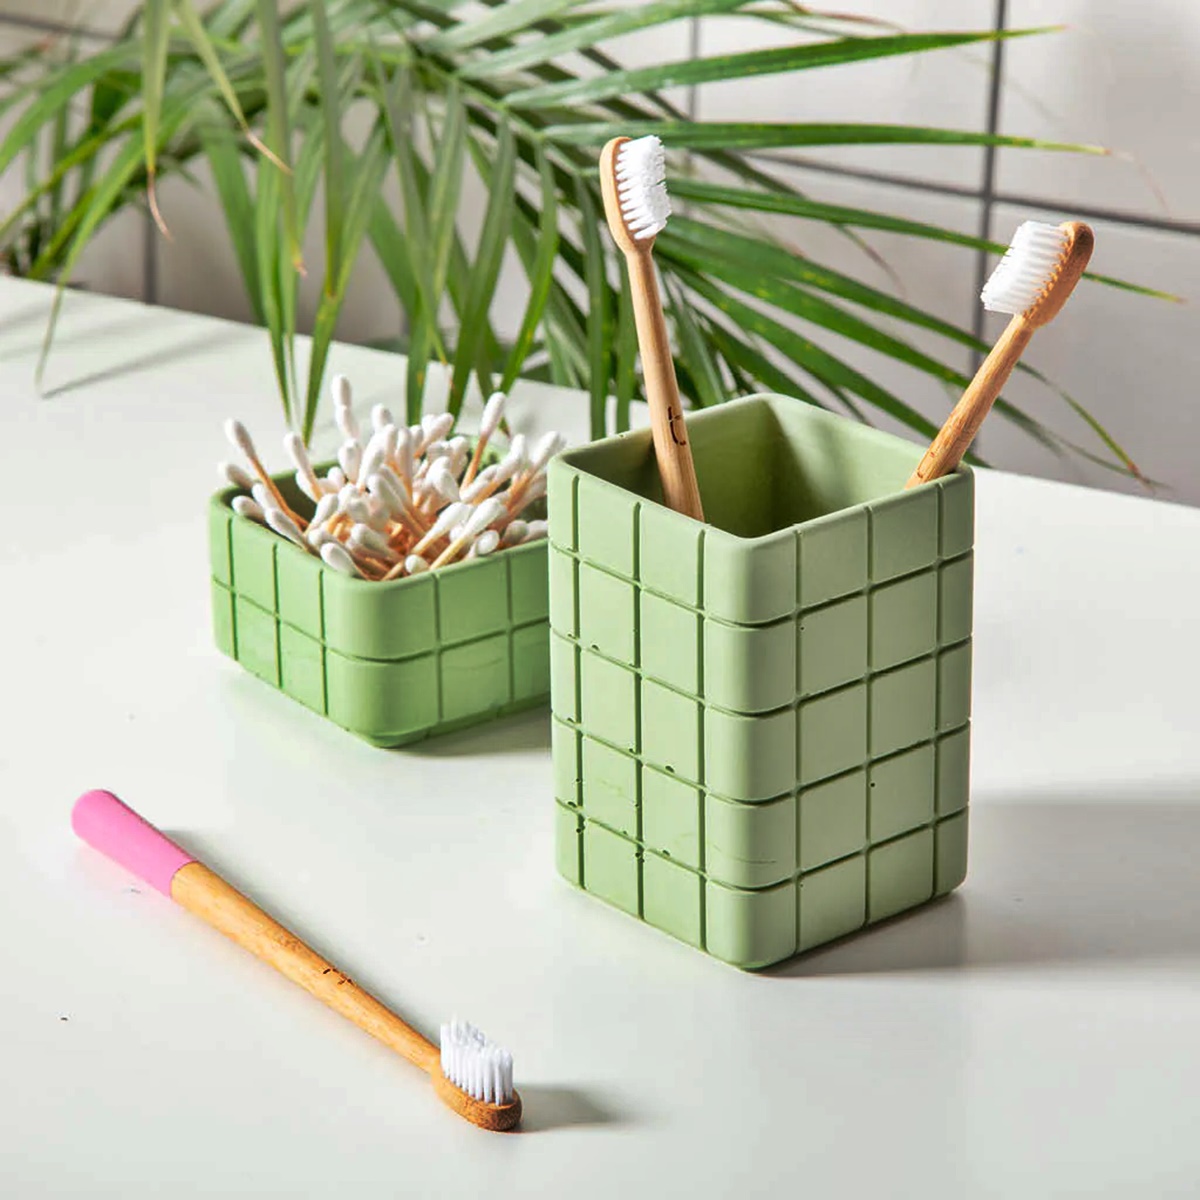 What To Do With A Toothbrush Holder